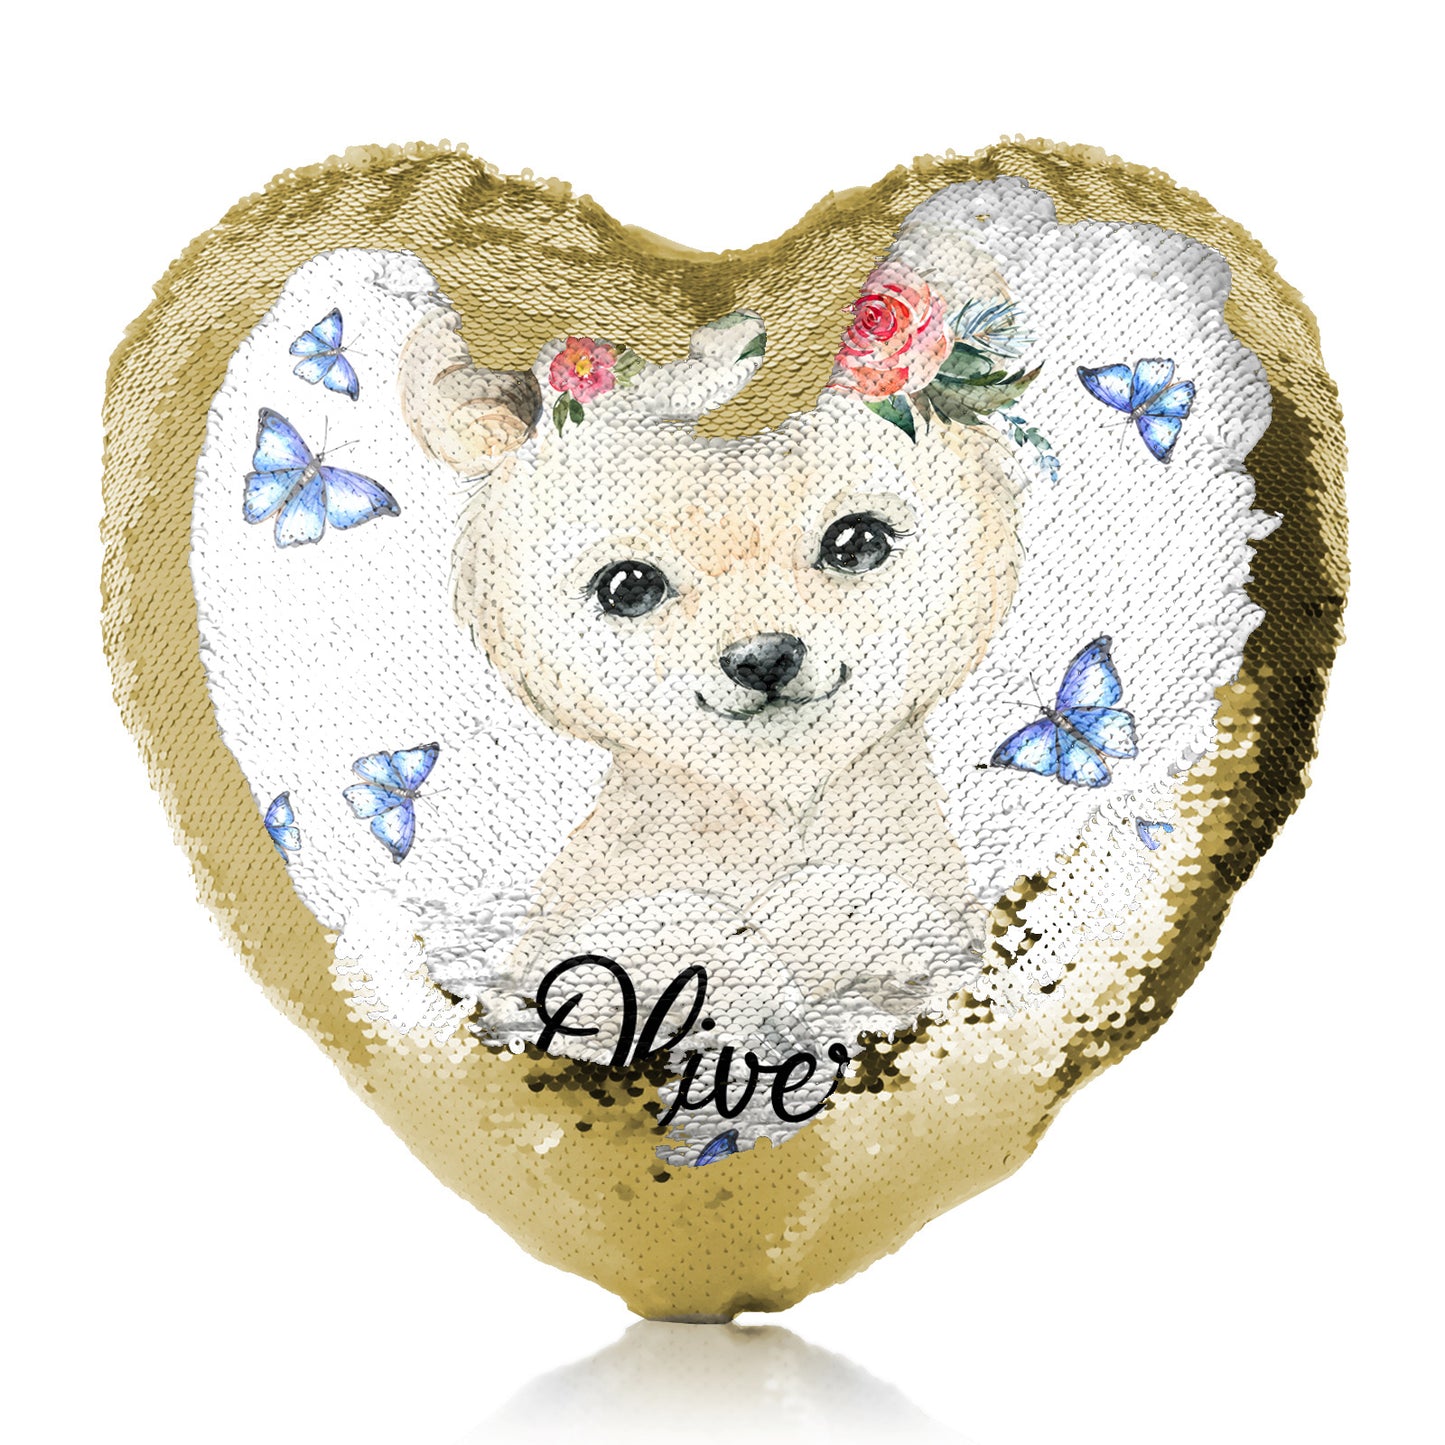 Personalised Sequin Heart Cushion with White Polar Bear Blue Butterflies and Cute Text